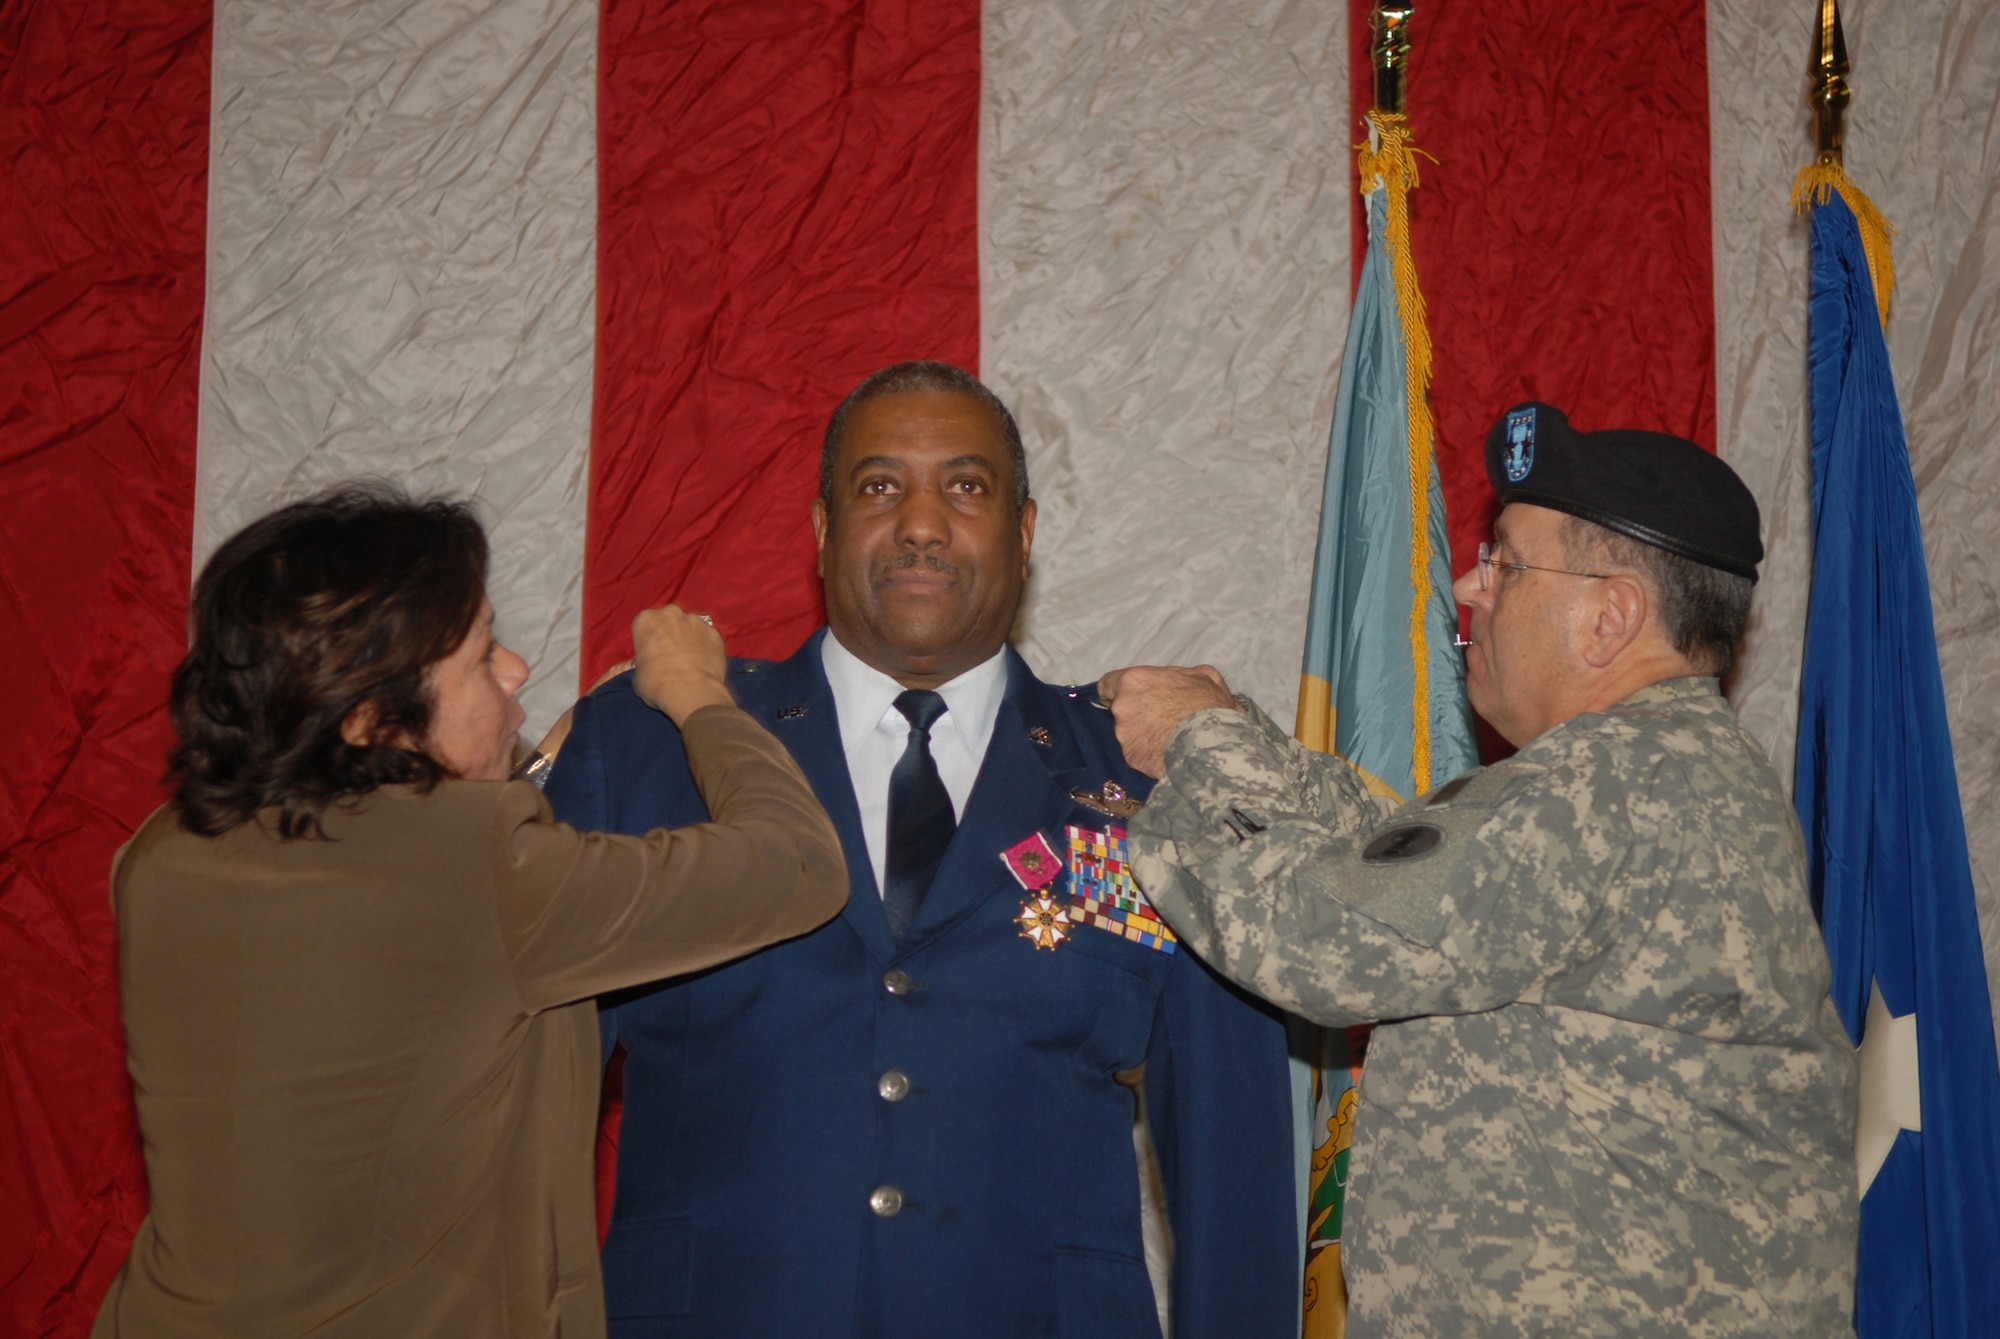 Brig. Gen. Ernest Talbert, vice commander, Delaware Air National Guard, is pinned with a second star signifying the honorary rank of major general in the Delaware National Guard upon his retirement from the Delaware ANG in New Castle, Del. on Jan. 11, 2009. Gen. Talbert's wife Richelle and Delaware National Guard Adjutant General Maj. Gen. Francis Vavala perform the pinning on ceremony. Gen. Talbert, a rated command pilot with more than 6,500 flight hours, flew C-130 aircraft missions in Operation Desert Storm and was the 166th Airlift Wing commander in Operation Iraqi Freedom. During his 36-year career he became the first African-American colonel in the Delaware ANG, and the first and only African-American general in the over 350-year history of the Delaware National Guard. (U.S. Air Force photo/Staff Sgt. Melissa Chatham)